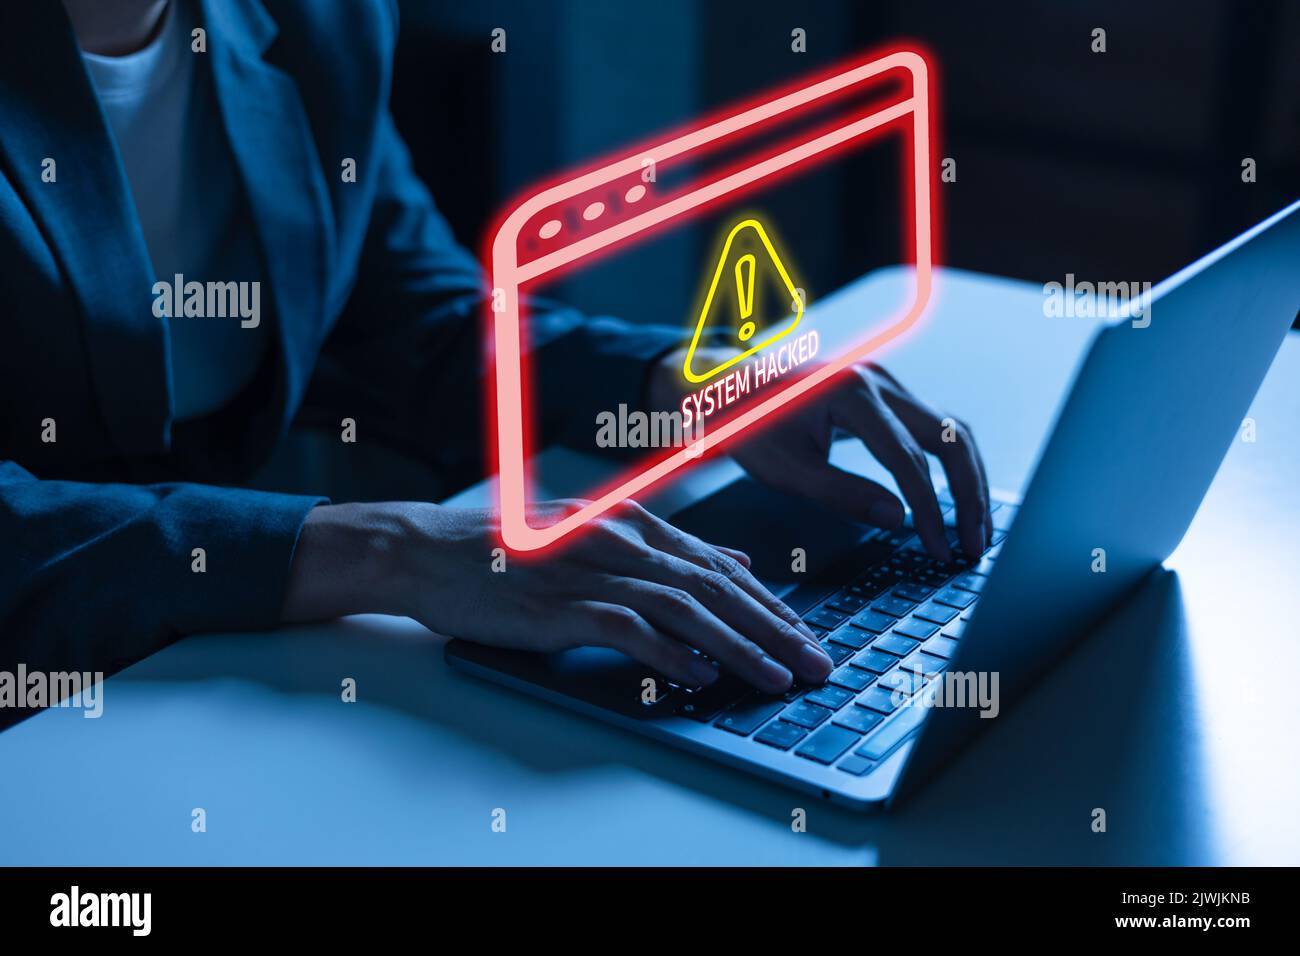 Young man in business suit using a laptop computer facing a cyber attack warning and box of error messages for being hacked and compromised from the hackers Stock Photo